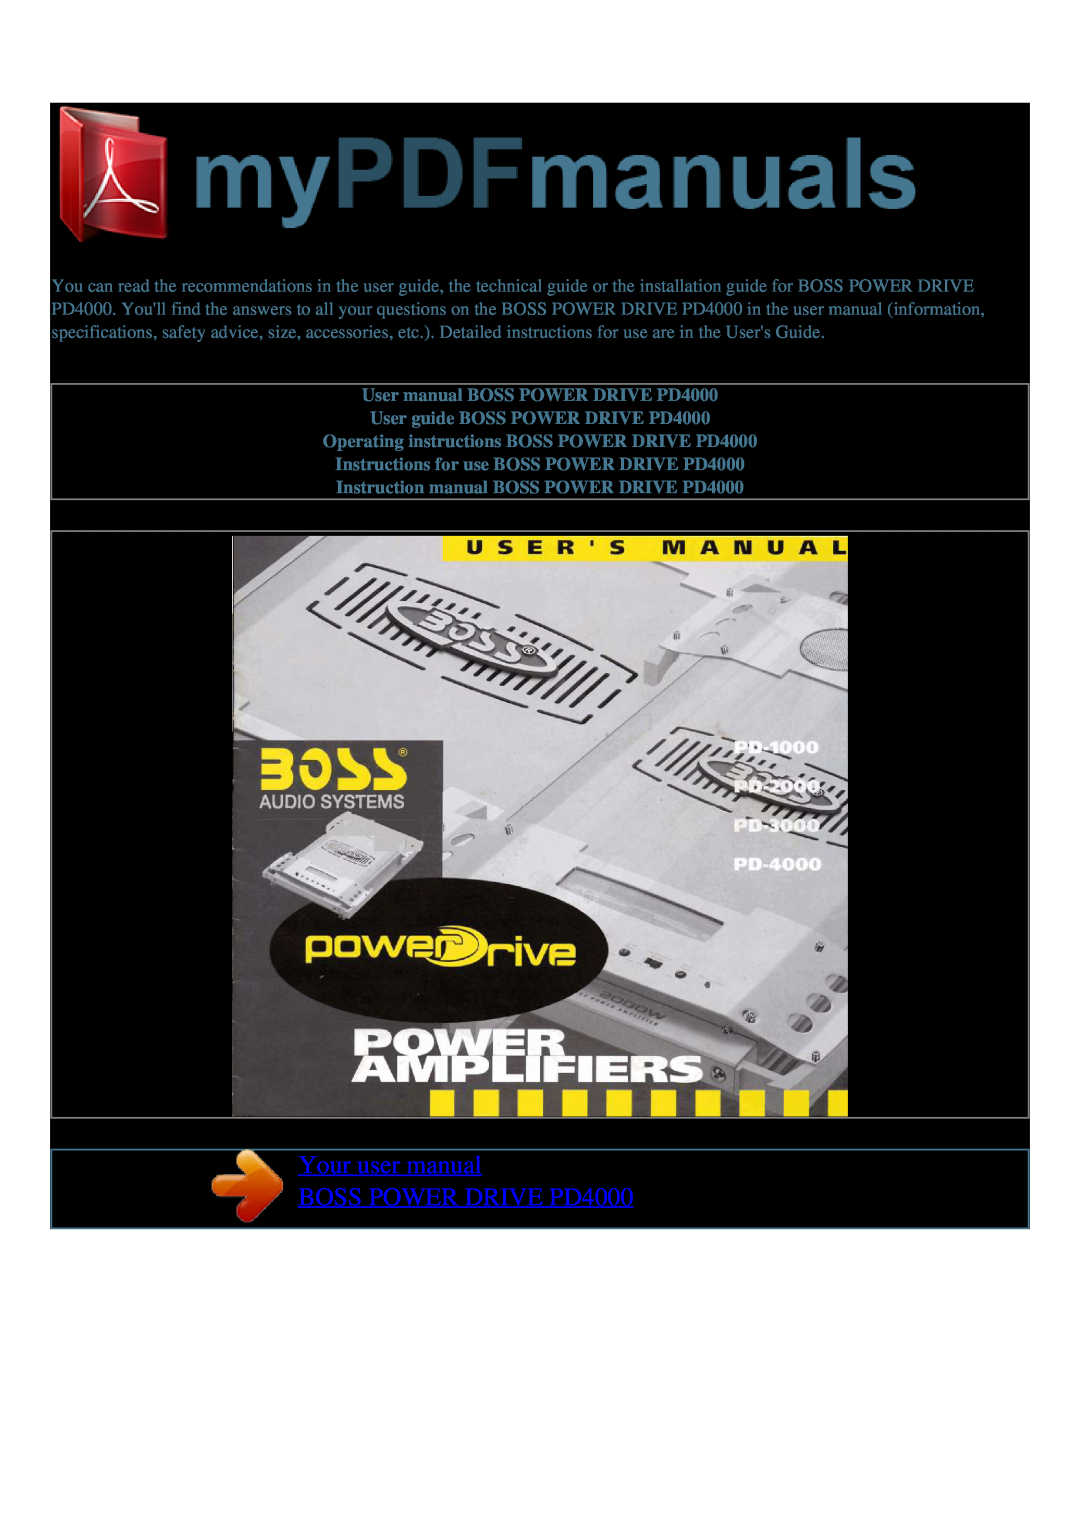 Boss Audio Systems PD-1000, PD-4000, PD-3000, PD-2000 user manual 